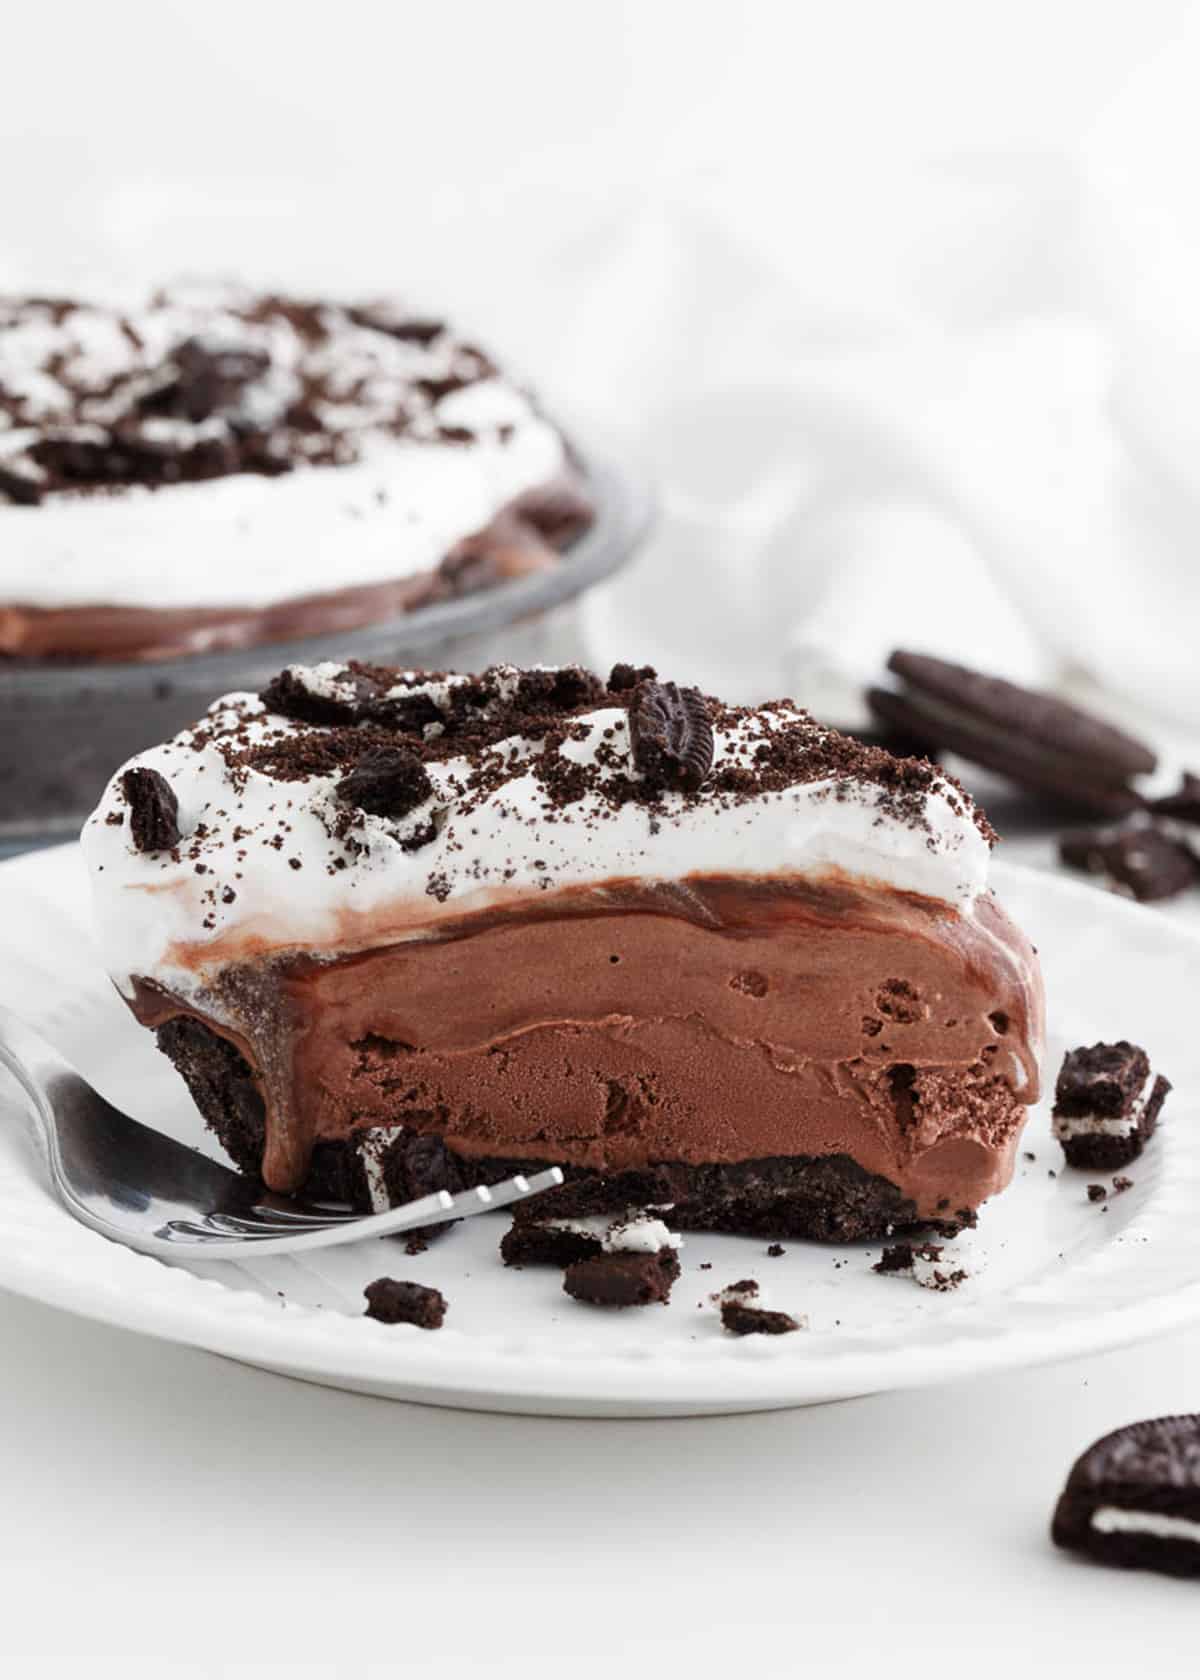 Slice of mud pie on a white plate.